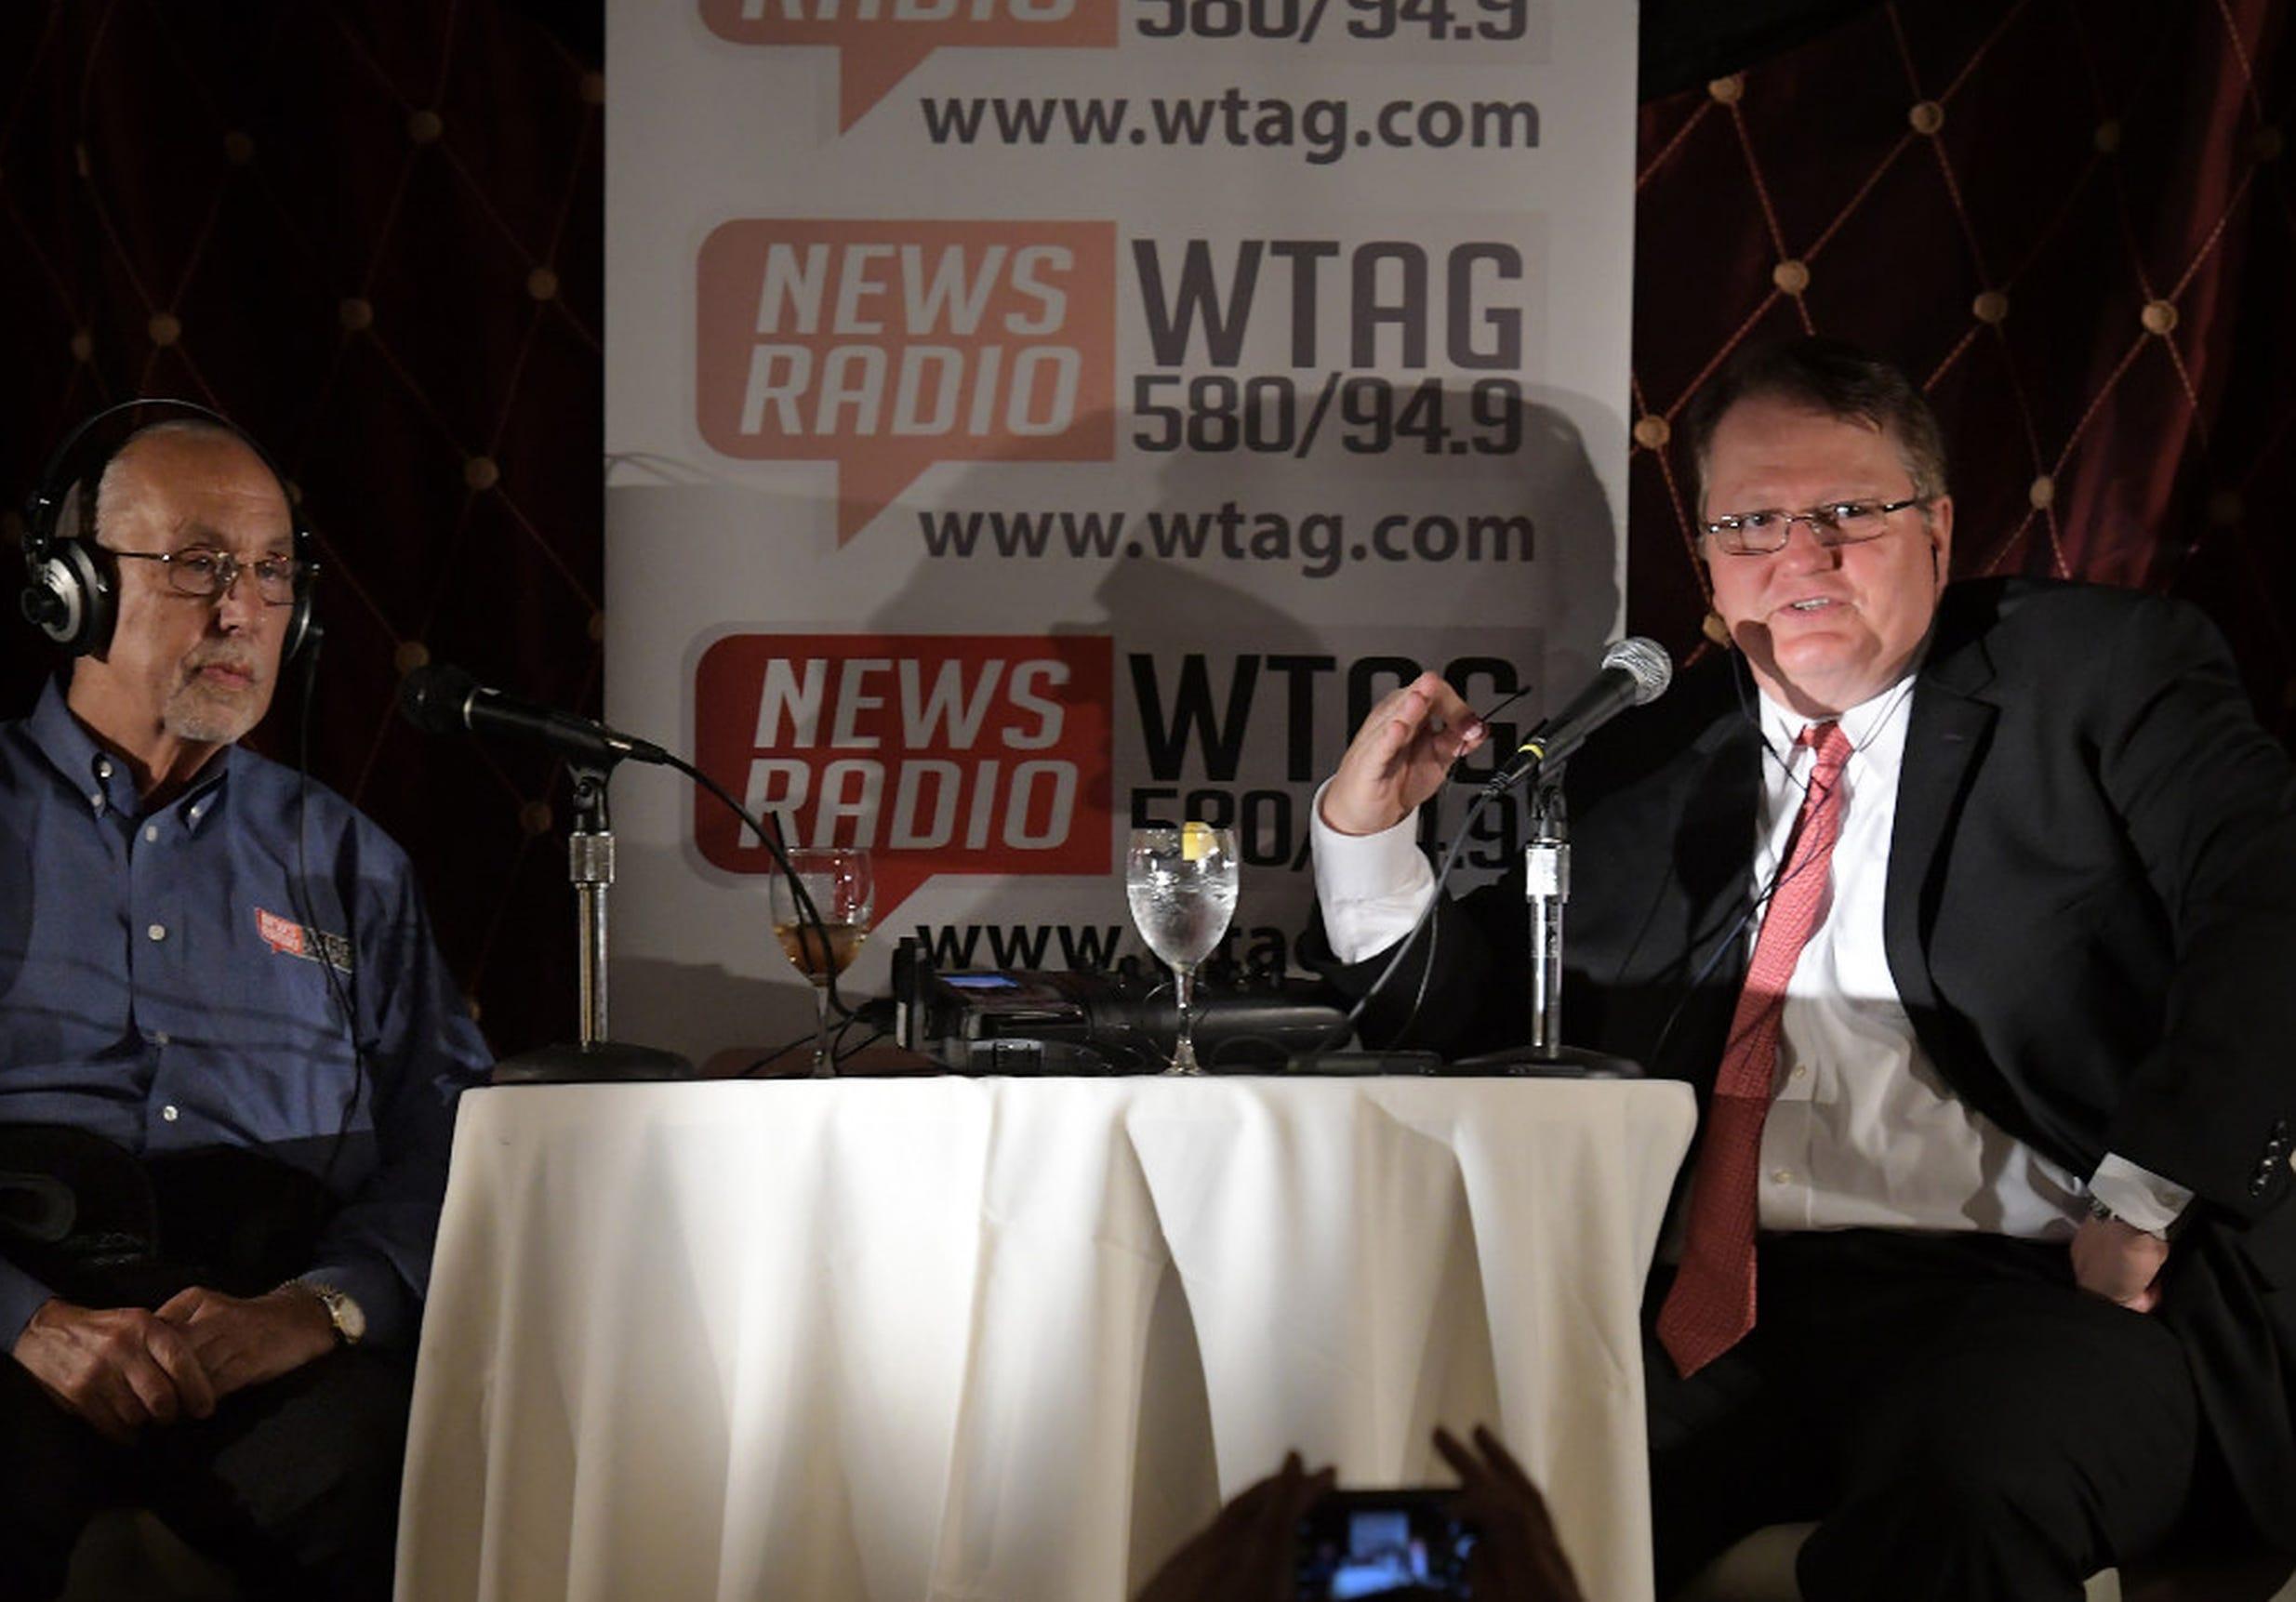 Jordan Levy and Jim Polito broadcast live on WTAG radio during a televised political debate between Donald J. Trump and Hillary Clinton shown on a big screen at Luciano